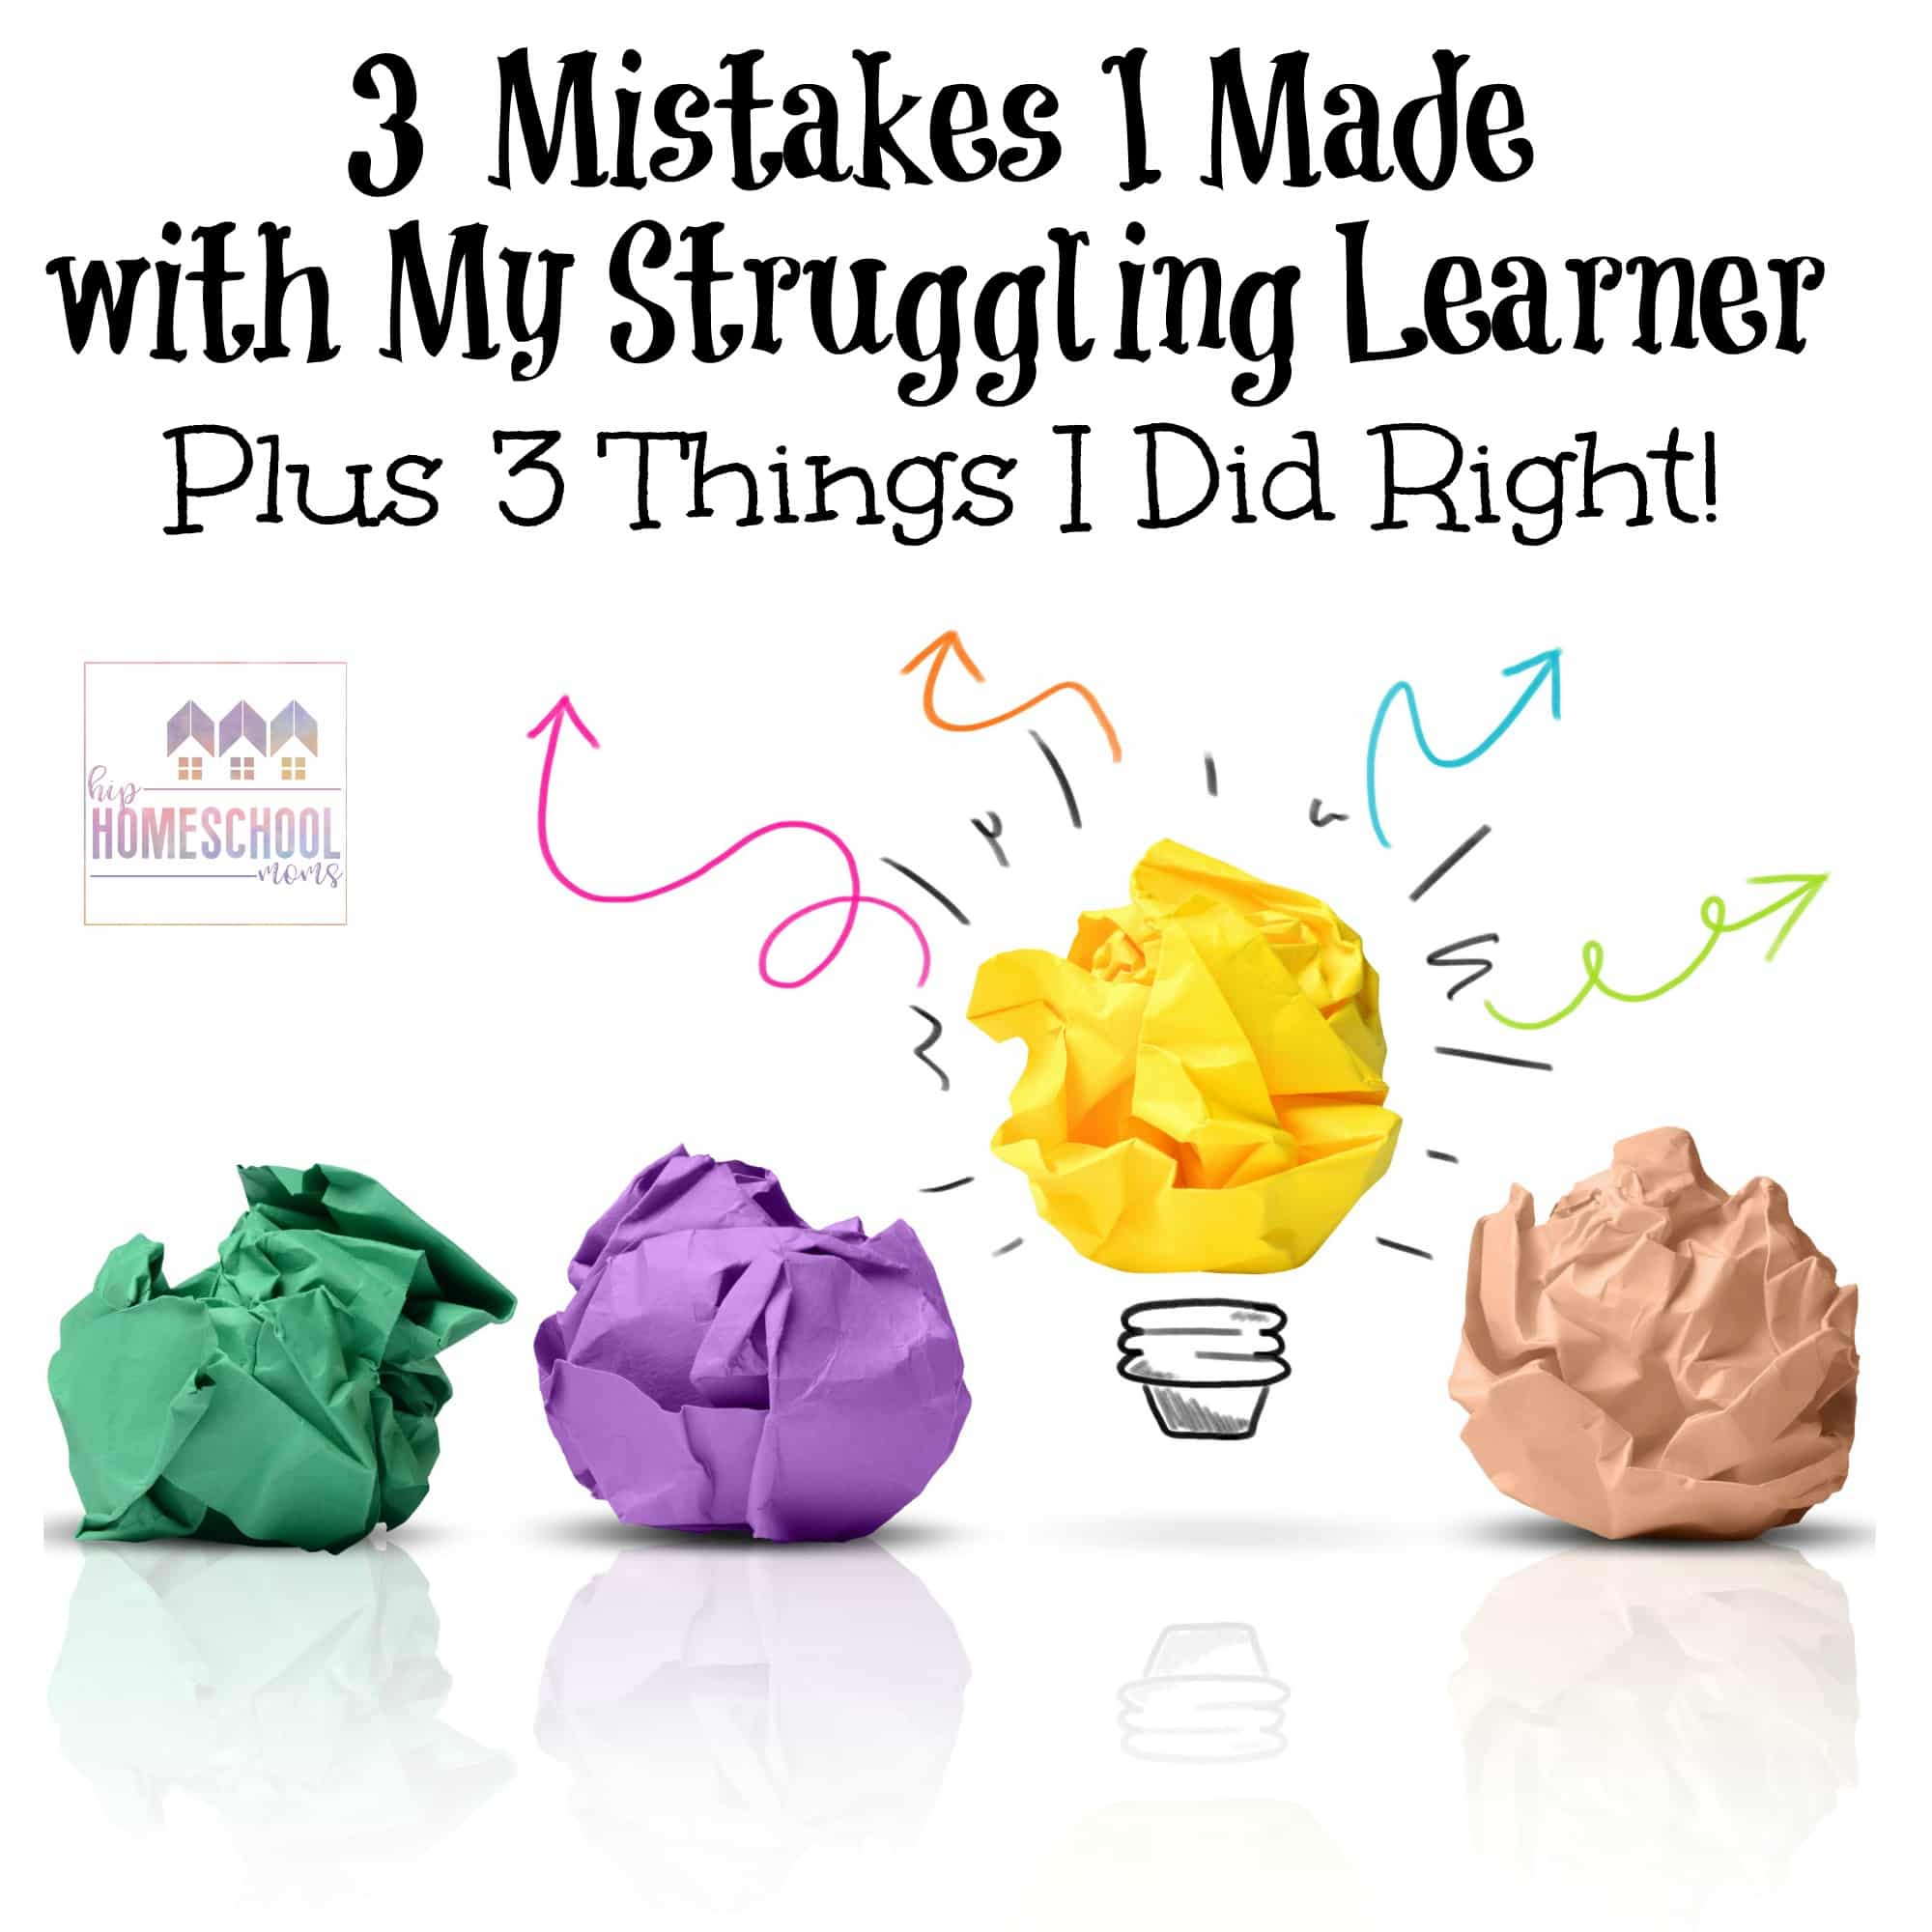 Mistakes and Successes with My Struggling Learner